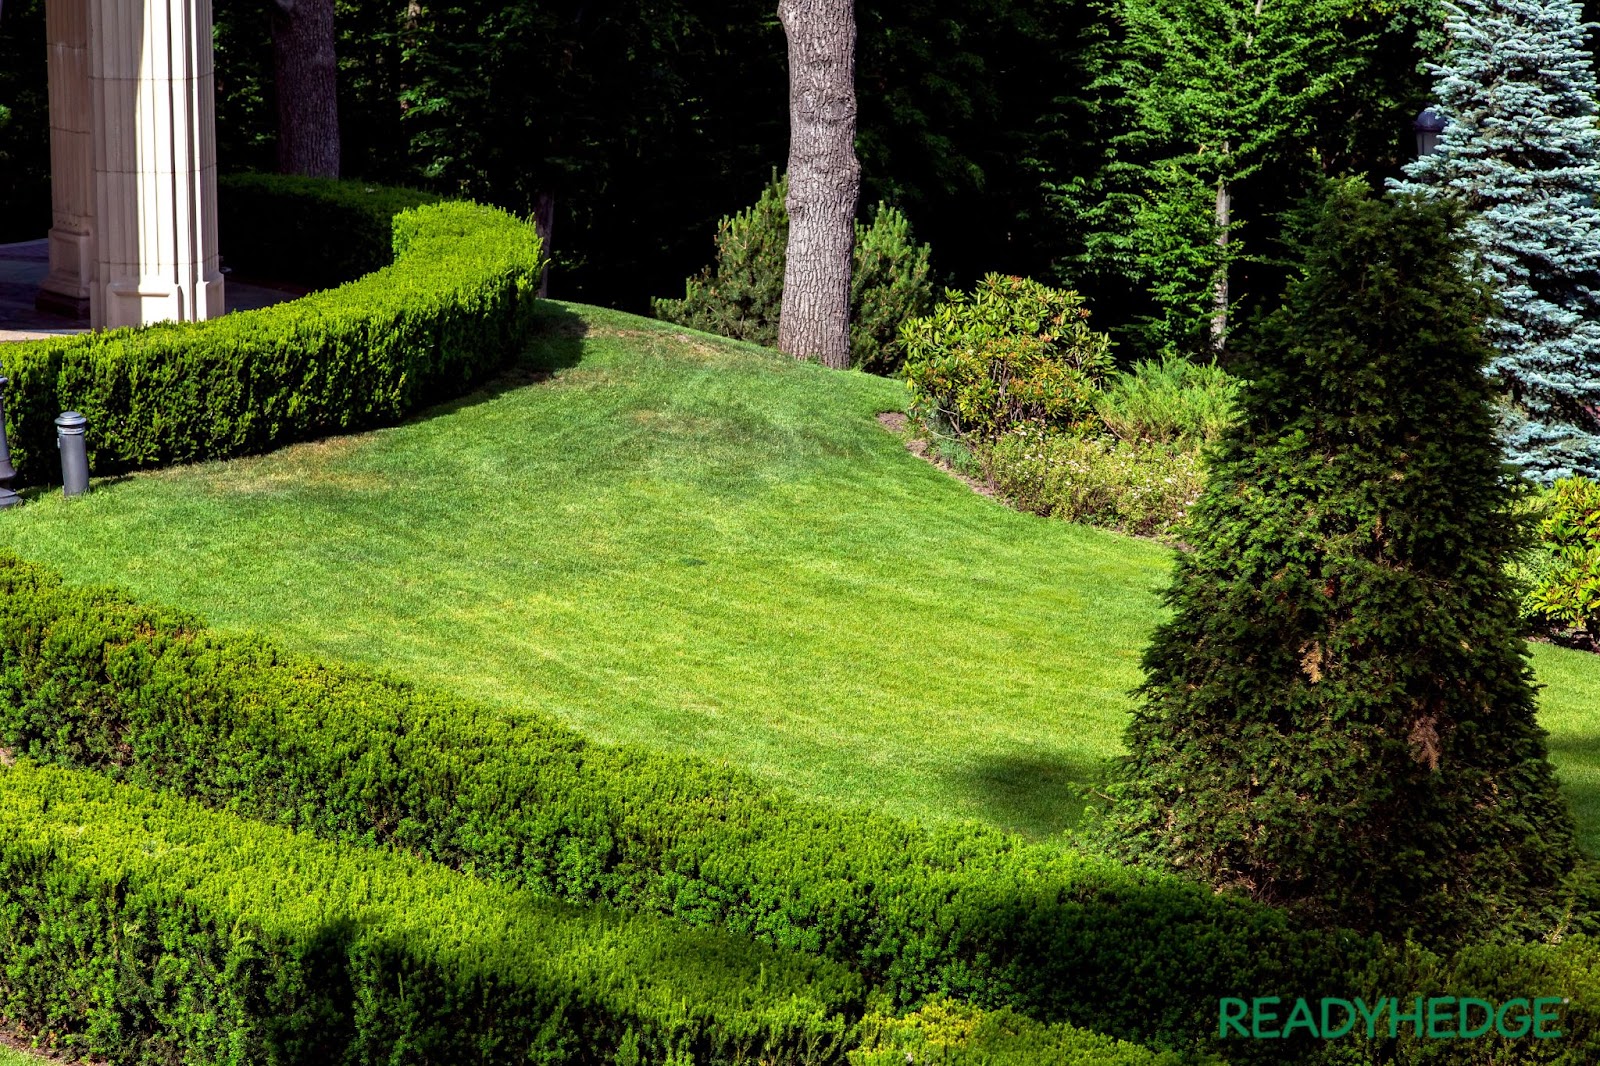  Nurture a Low-maintenance Hedge with Evergreen Shrubs like Boxwood or Yew